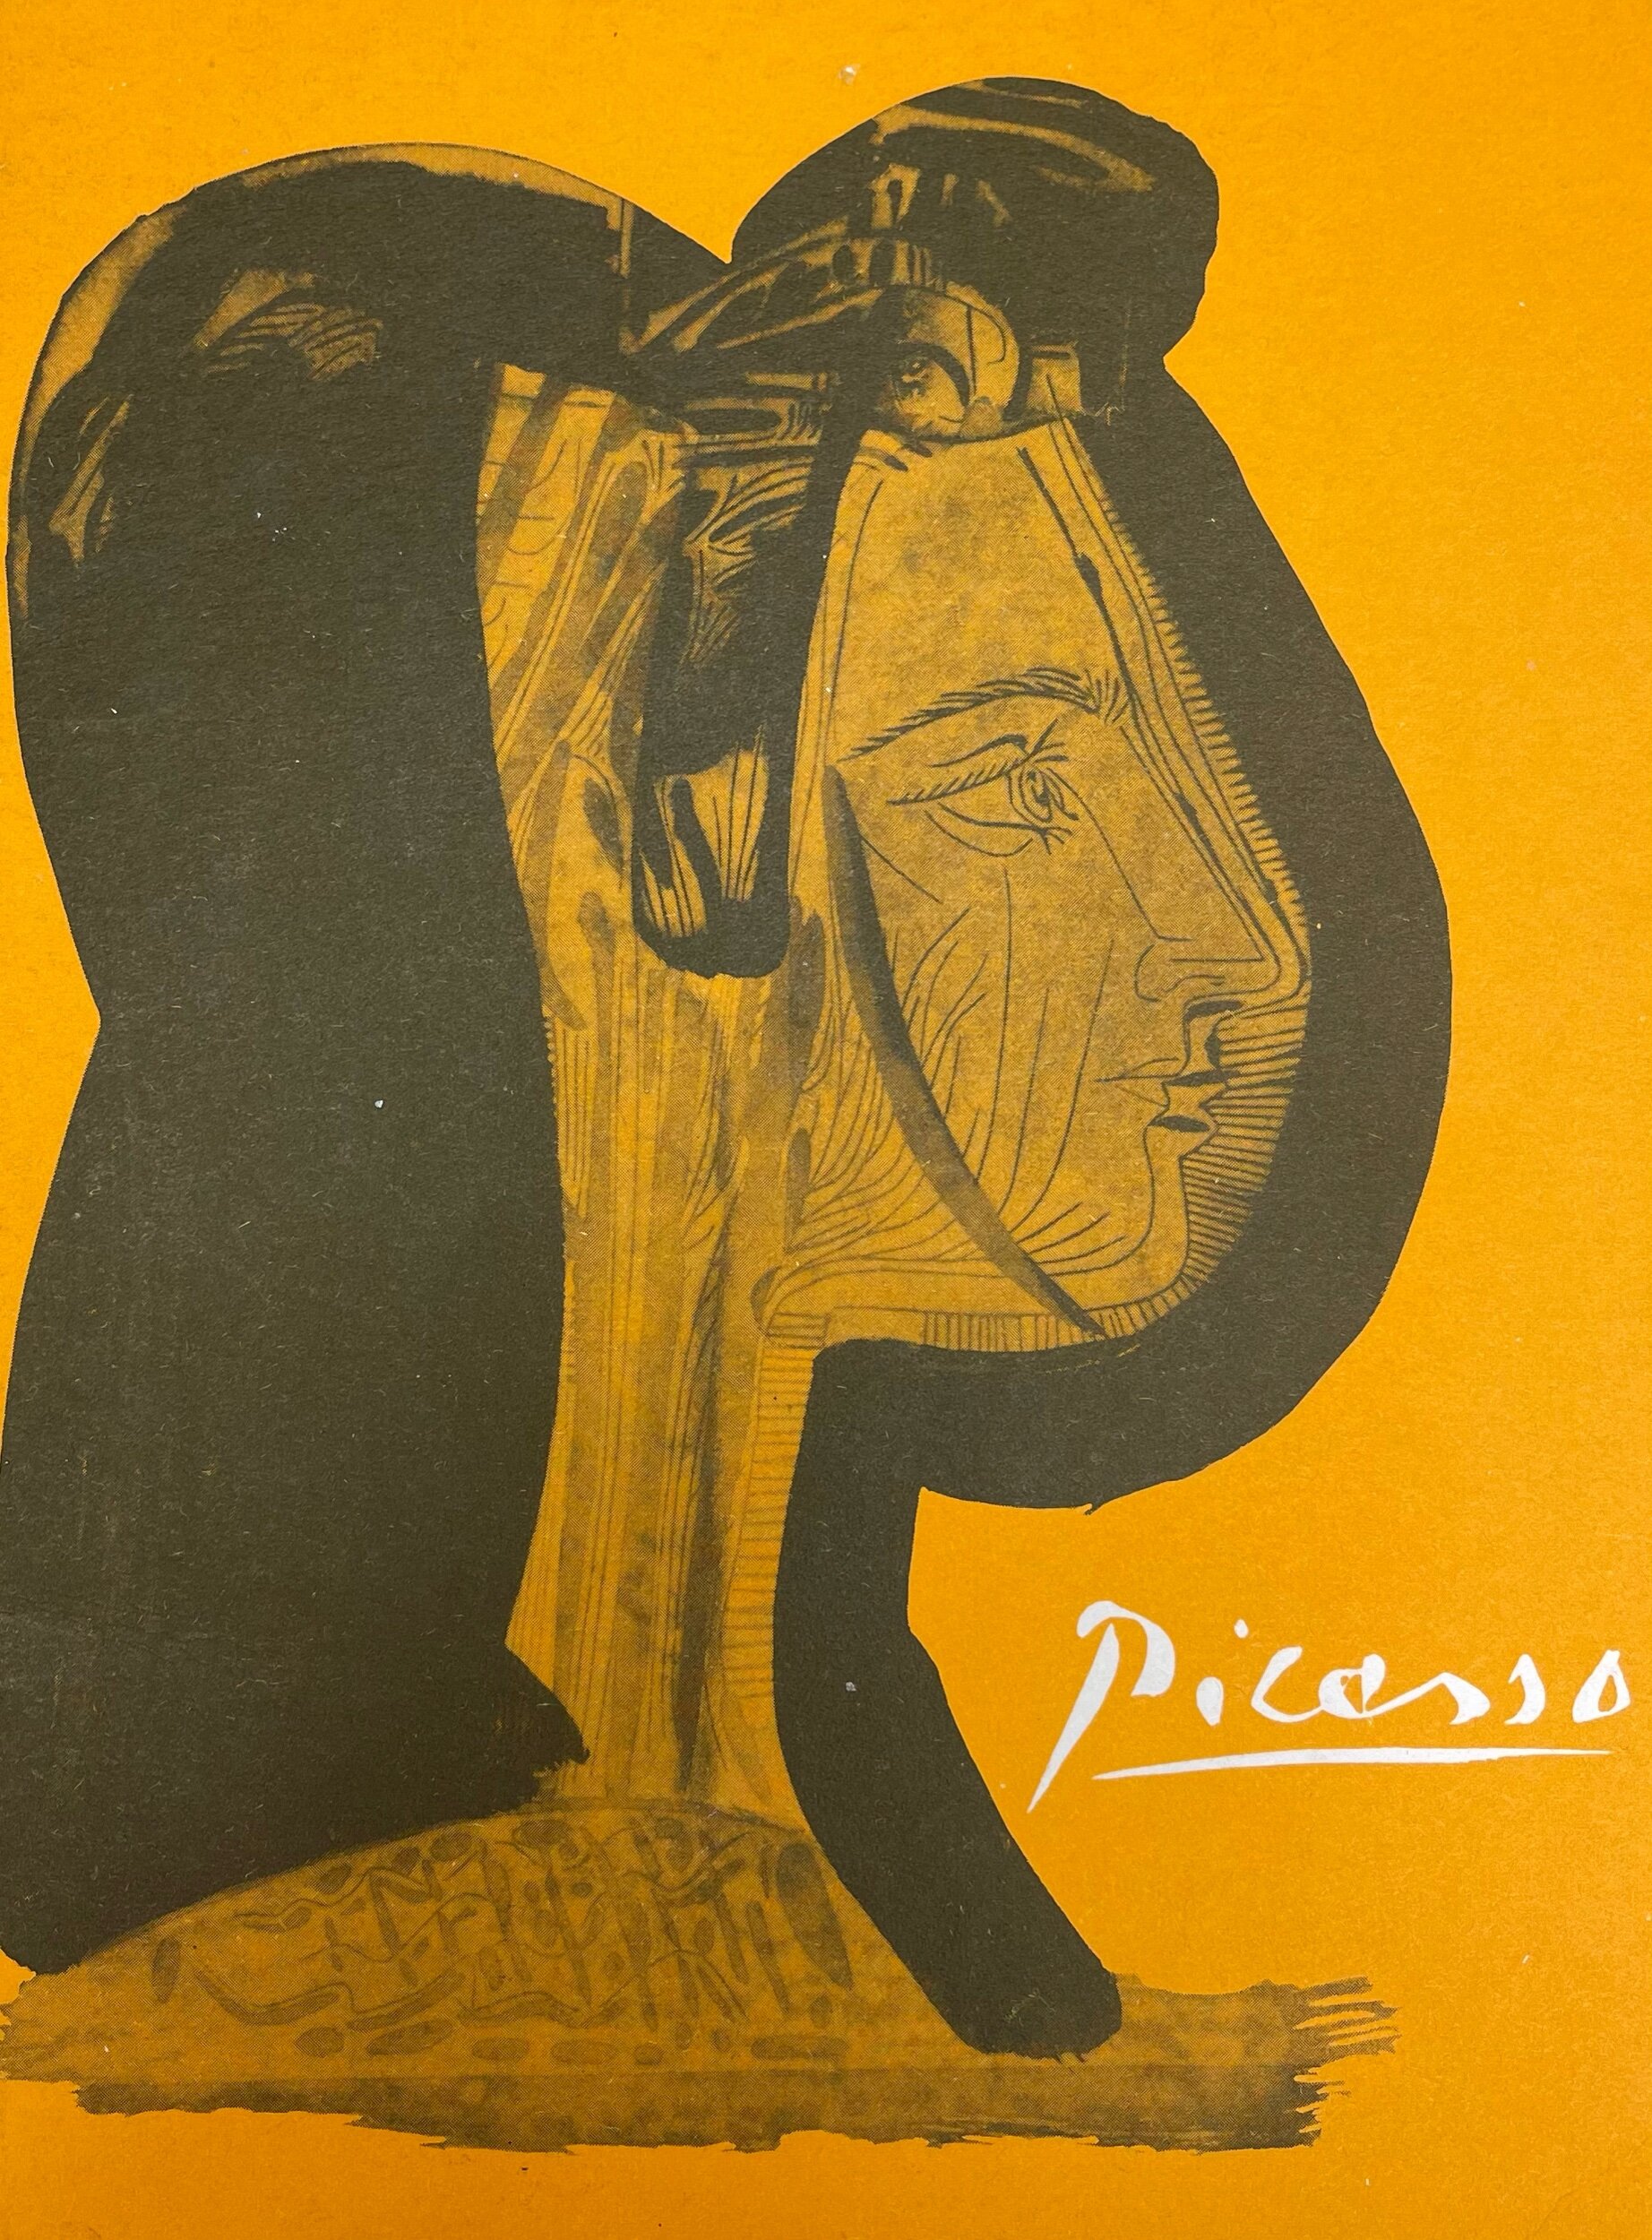 Brook Street Gallery catalogue from Picasso's solo exhibition.